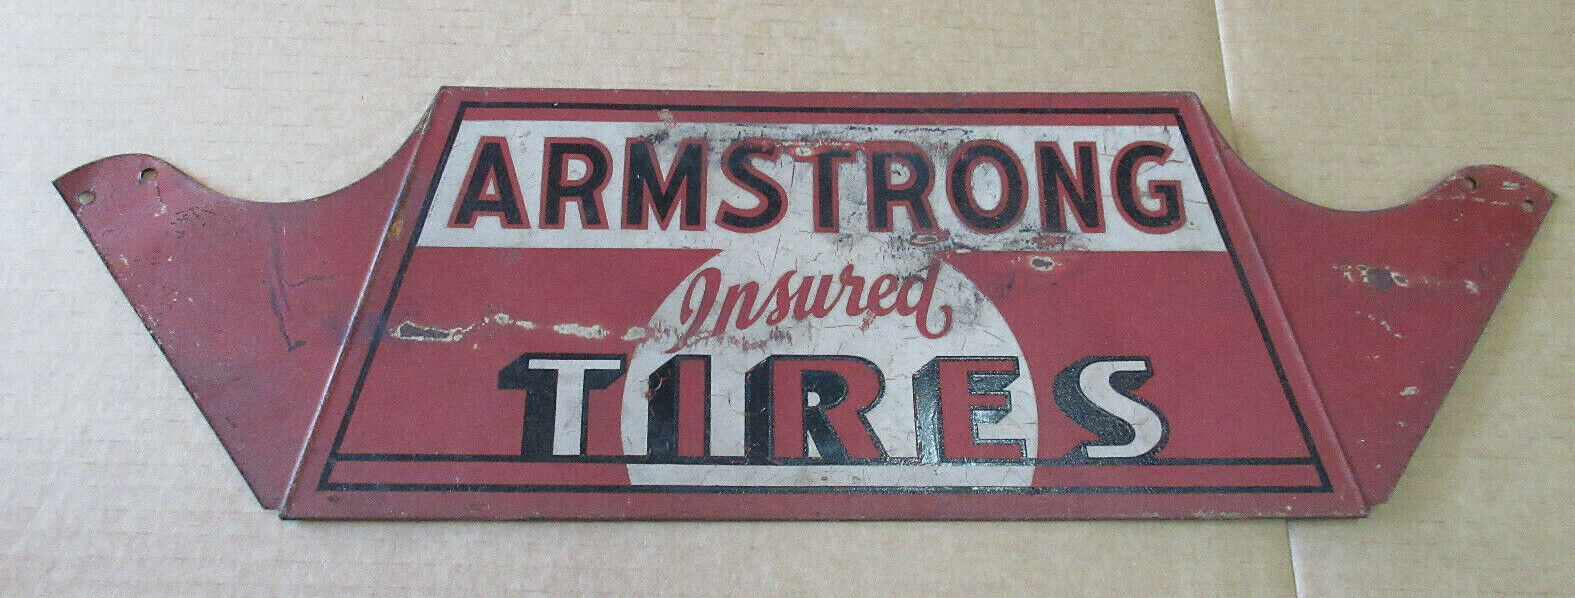 Vintage 1930s Armstrong Insured Tire Metal Sign Gas Station Oil 